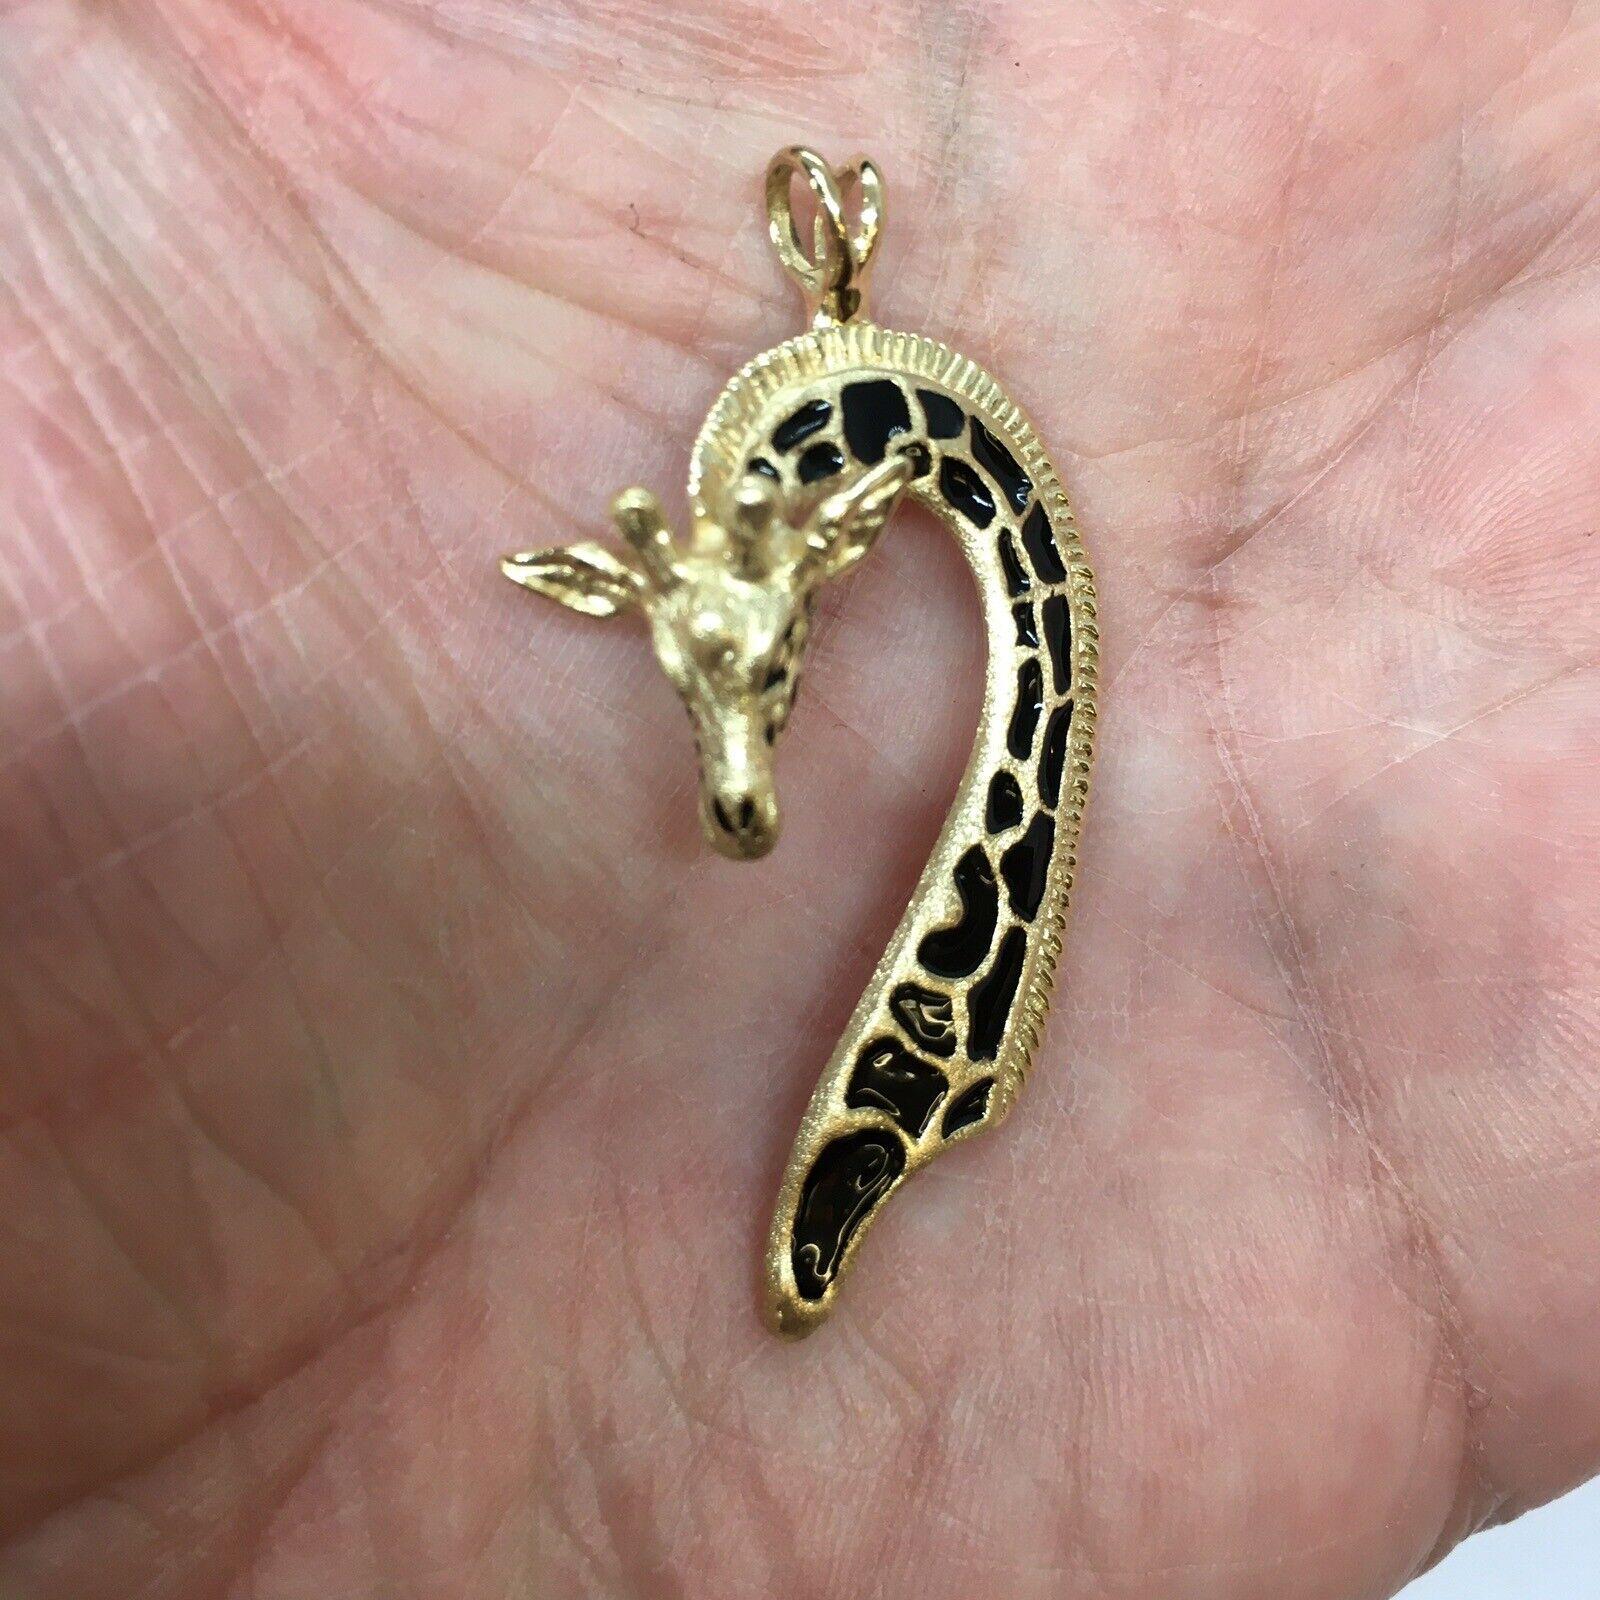 G & G Appleby 14 Karat Yellow Gold Enamel Giraffe Necklace Pendent

Gregory A. Appleby born in Van Nuys, Ca. He partnered with Gayle Bright and began sculpting precious metal jewelry. Their work has been featured in many galleries.  Gayle and